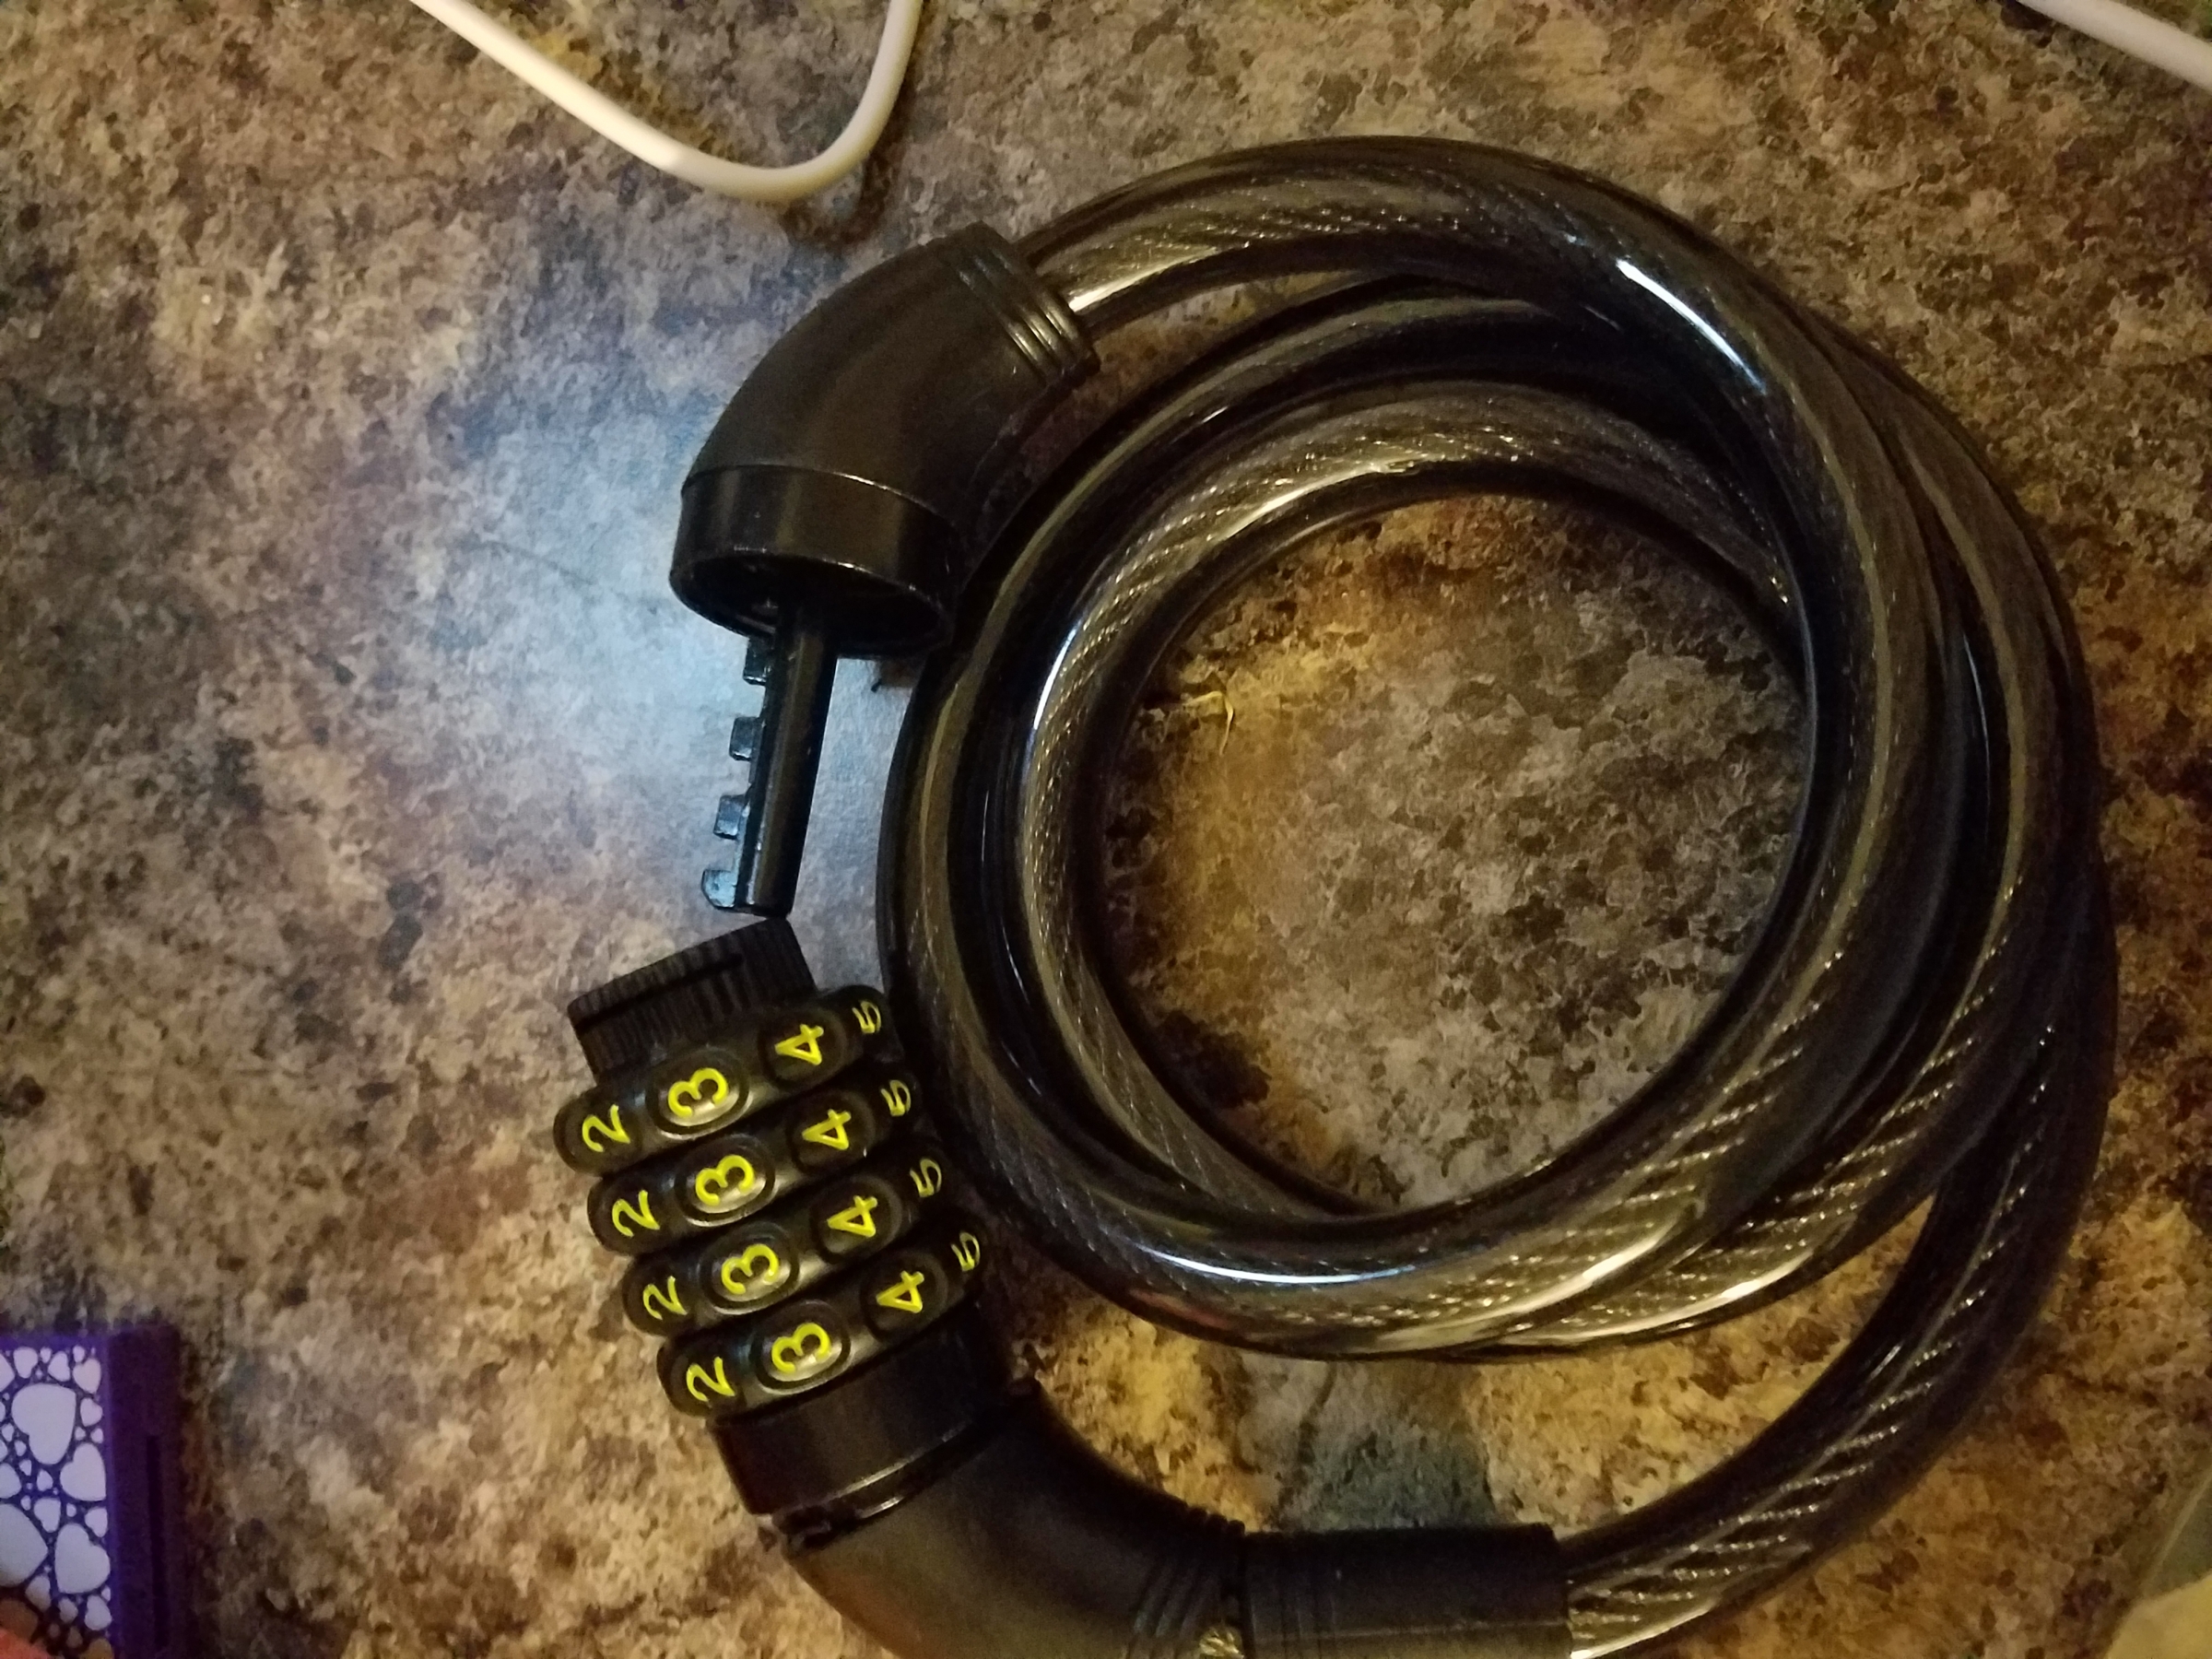 I highly recommend this cable lock